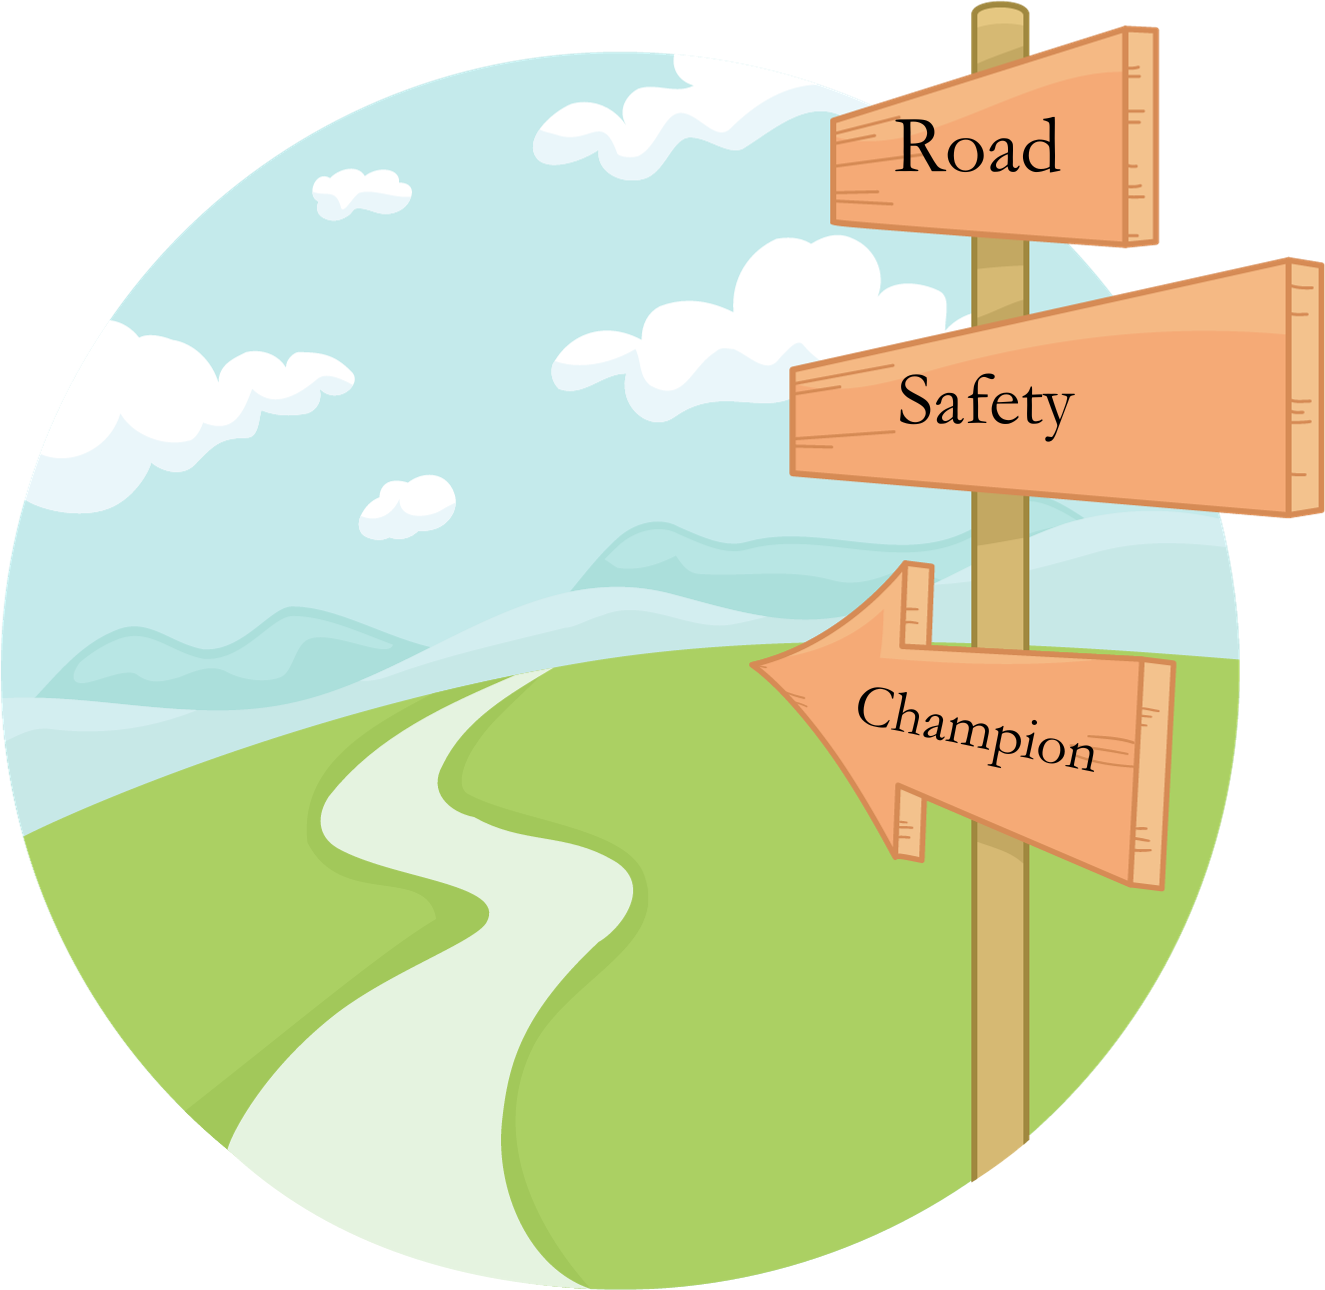 Road Safety Champion graphic